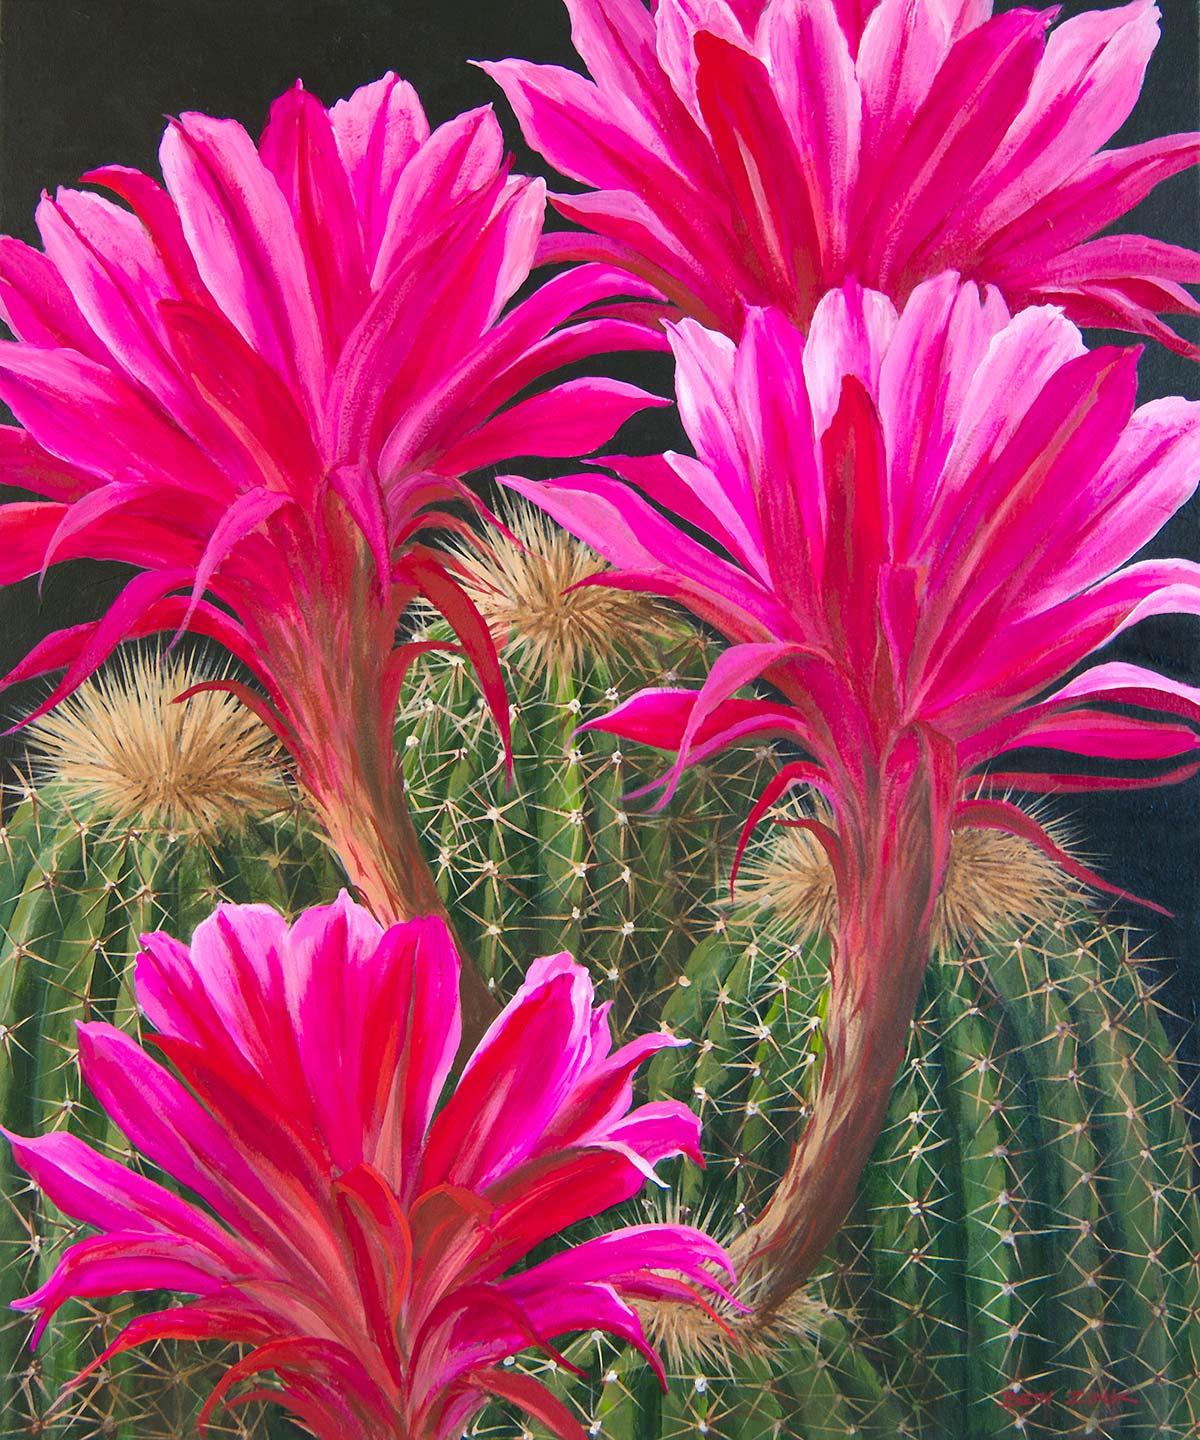 beth zink painting cactus with hot pink flowers